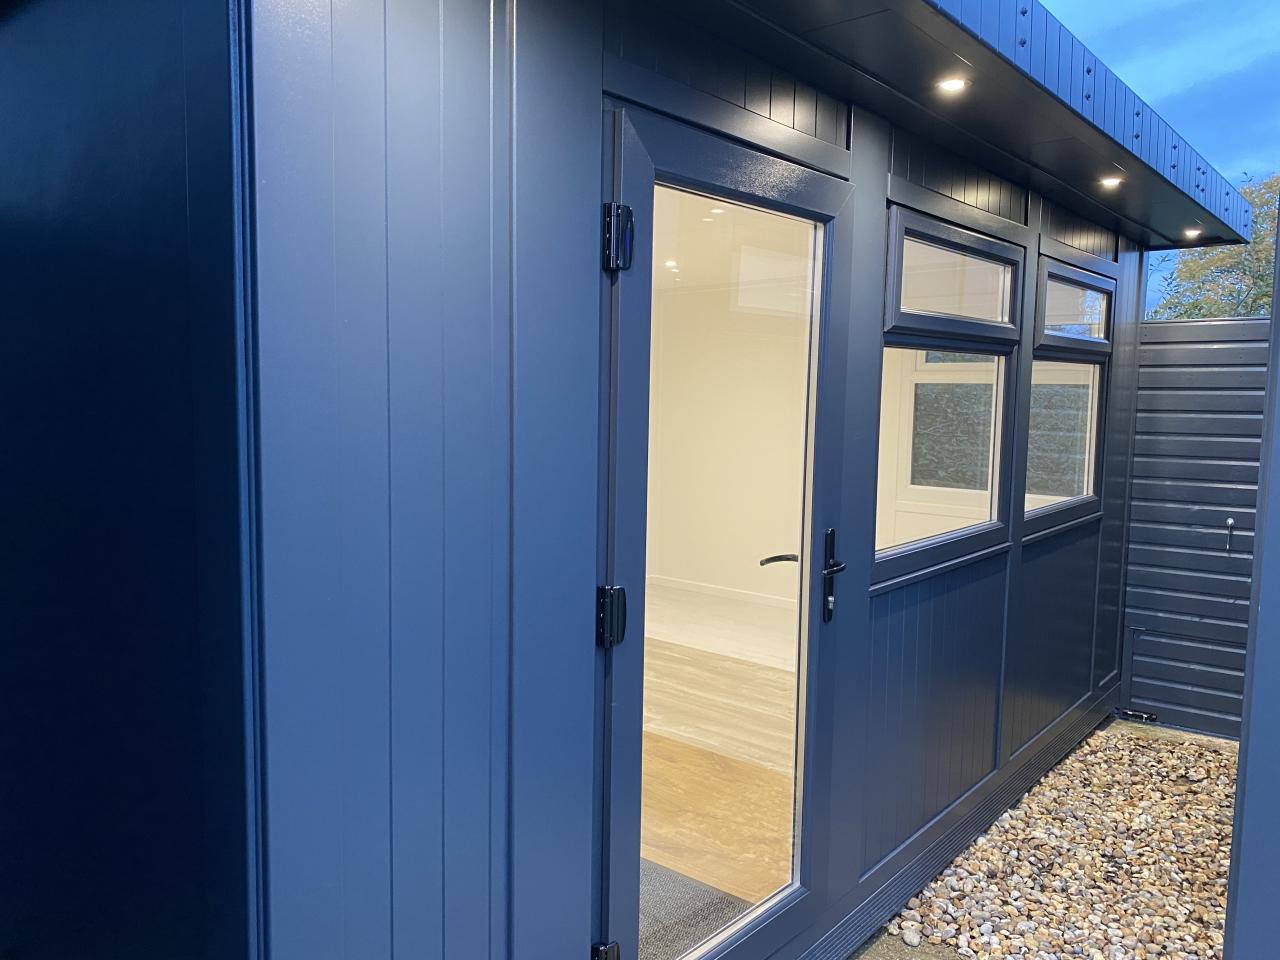 our new Jay garden studio, A selection of 8 standard sizes, that means we can stock component parts and deliver quickly and cost effective to you.
REF: Jay Studio  